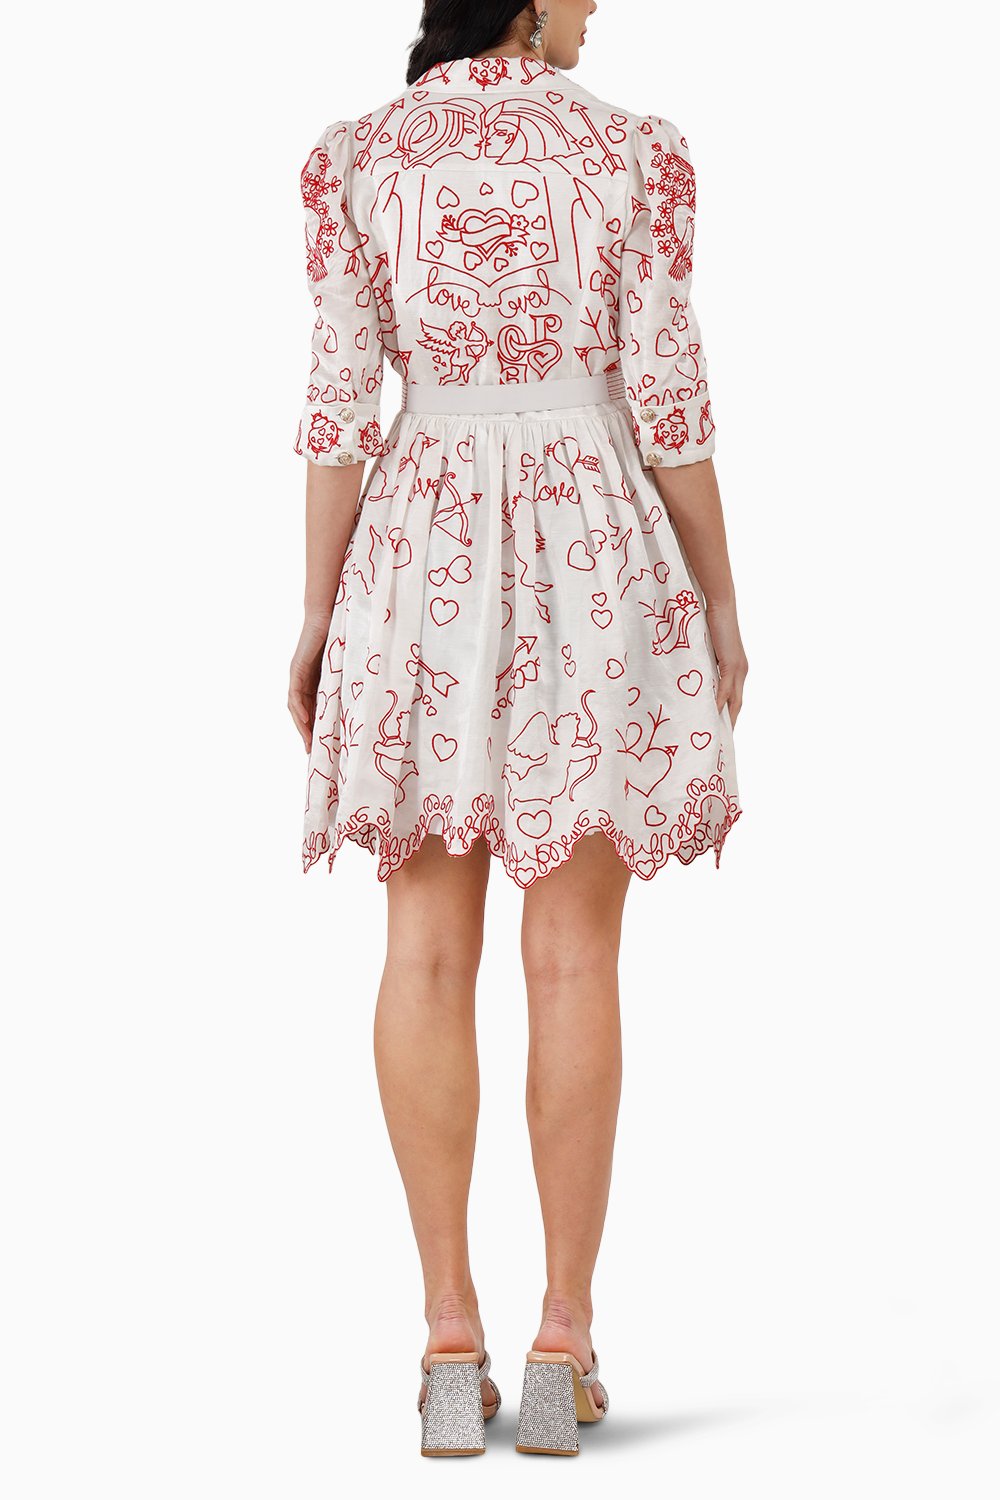 Red on White Cupid Amor Embroidered Mini Dress